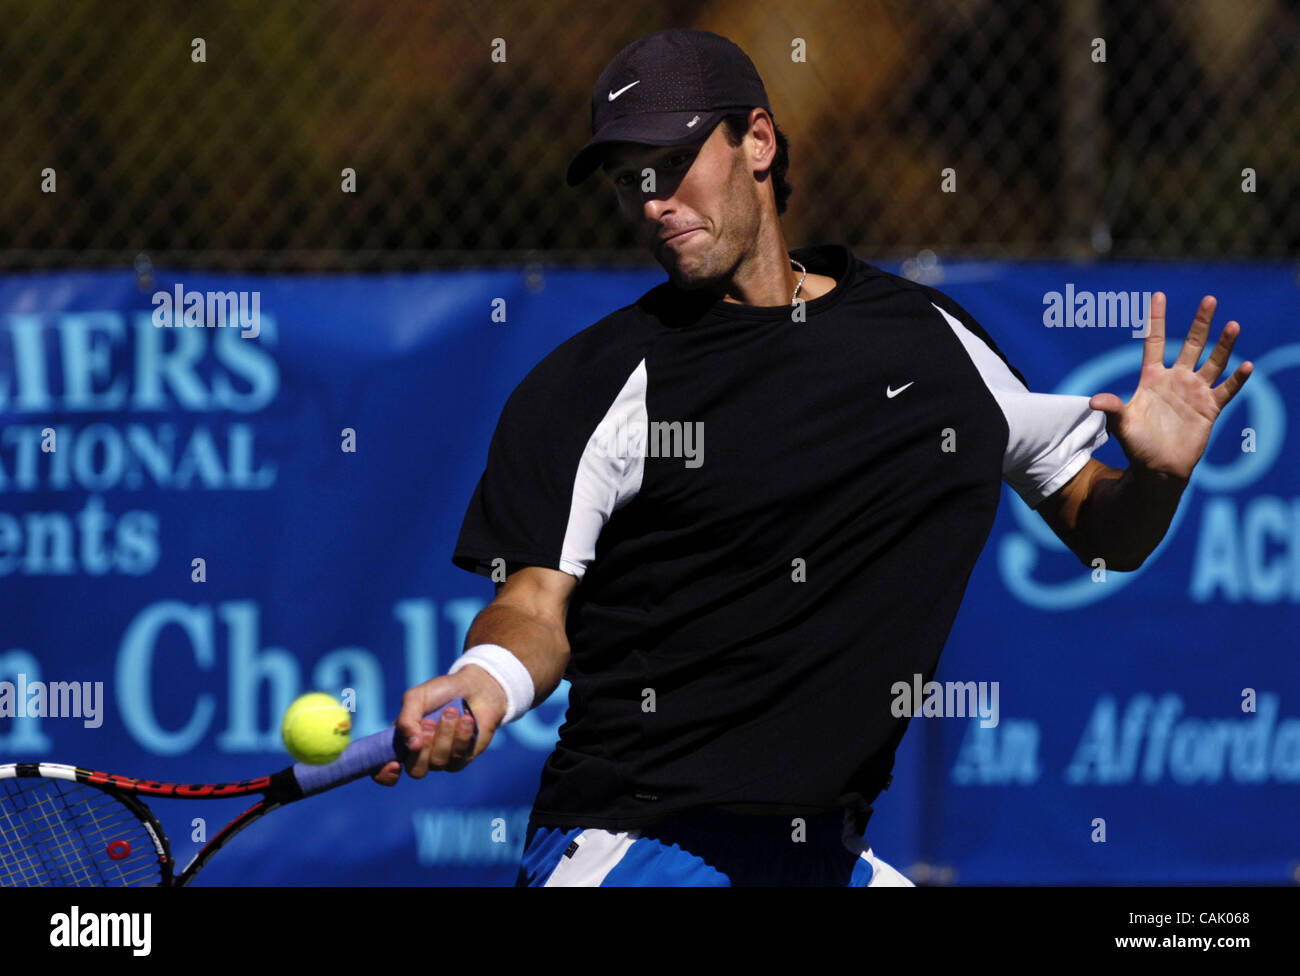 Sam Warburg of Sacramento practices at Sutter Lawn Tennis Club for the  Swanston Challenger tournament to be held next week, October 2, 2007.  Sacramento Bee/ Florence Low Stock Photo - Alamy